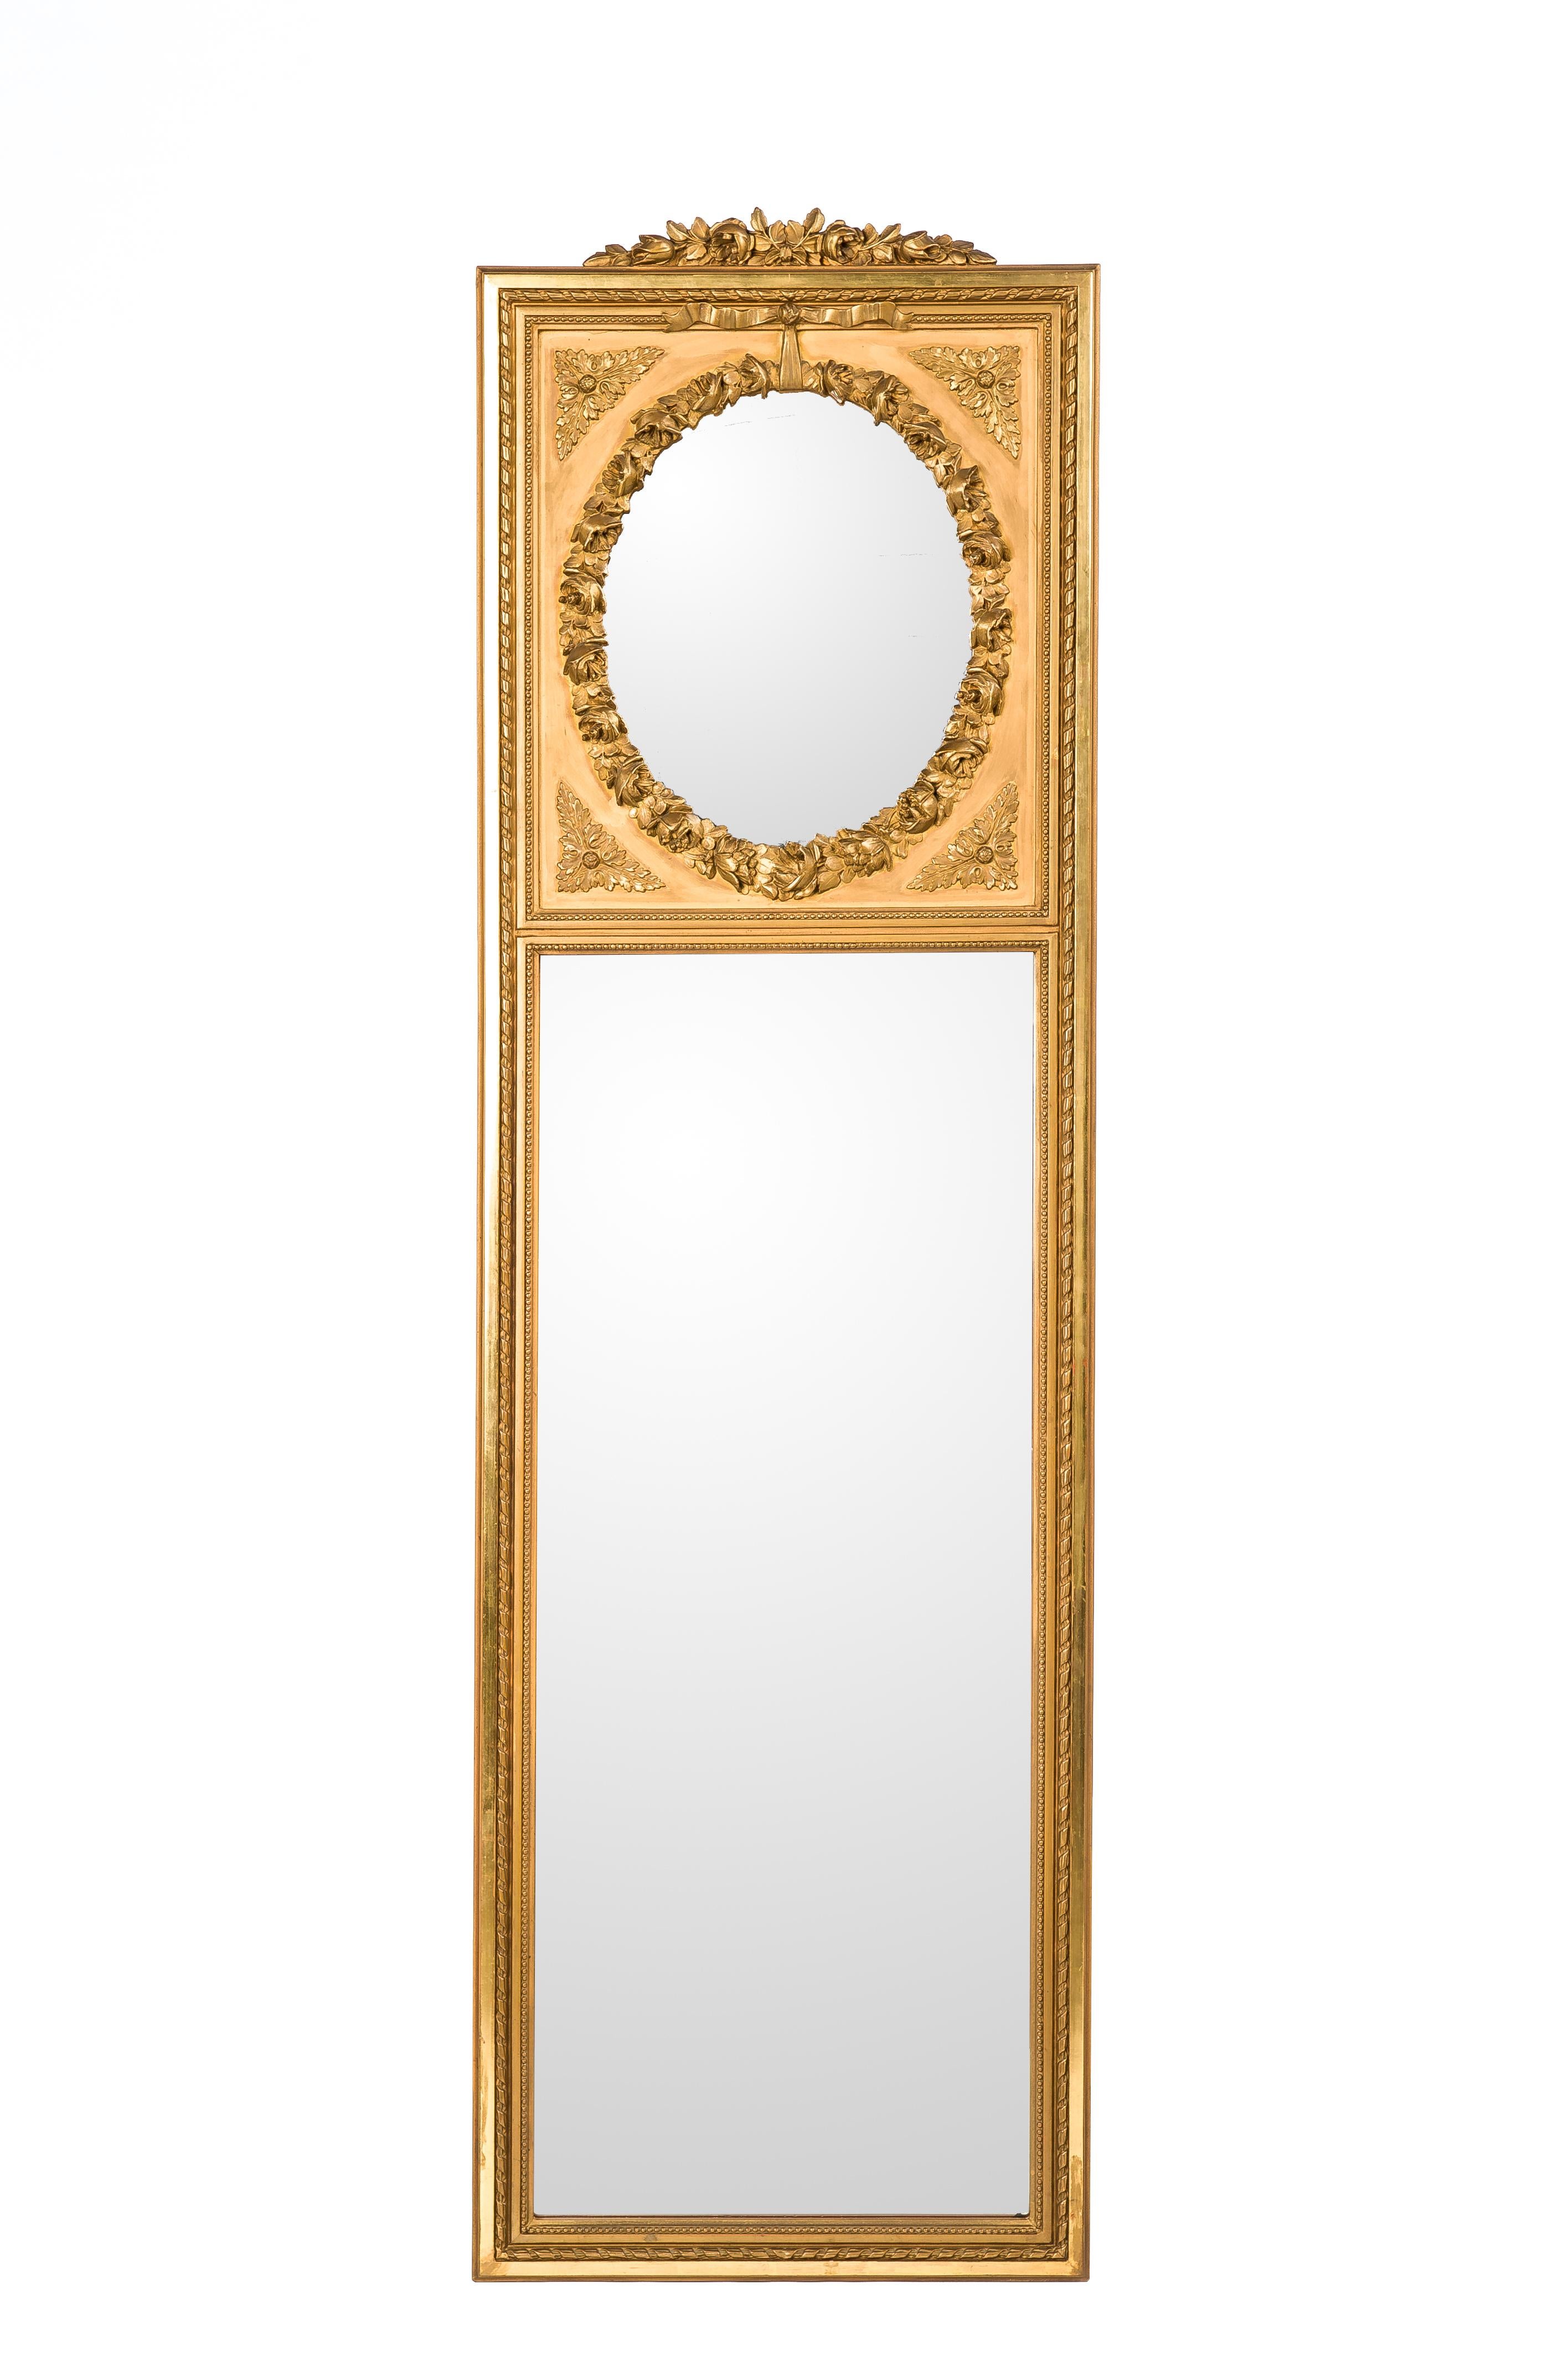 Antique Late 19th Century Louis XVI Gold Gilt French Pier Mirror with Crest For Sale 5